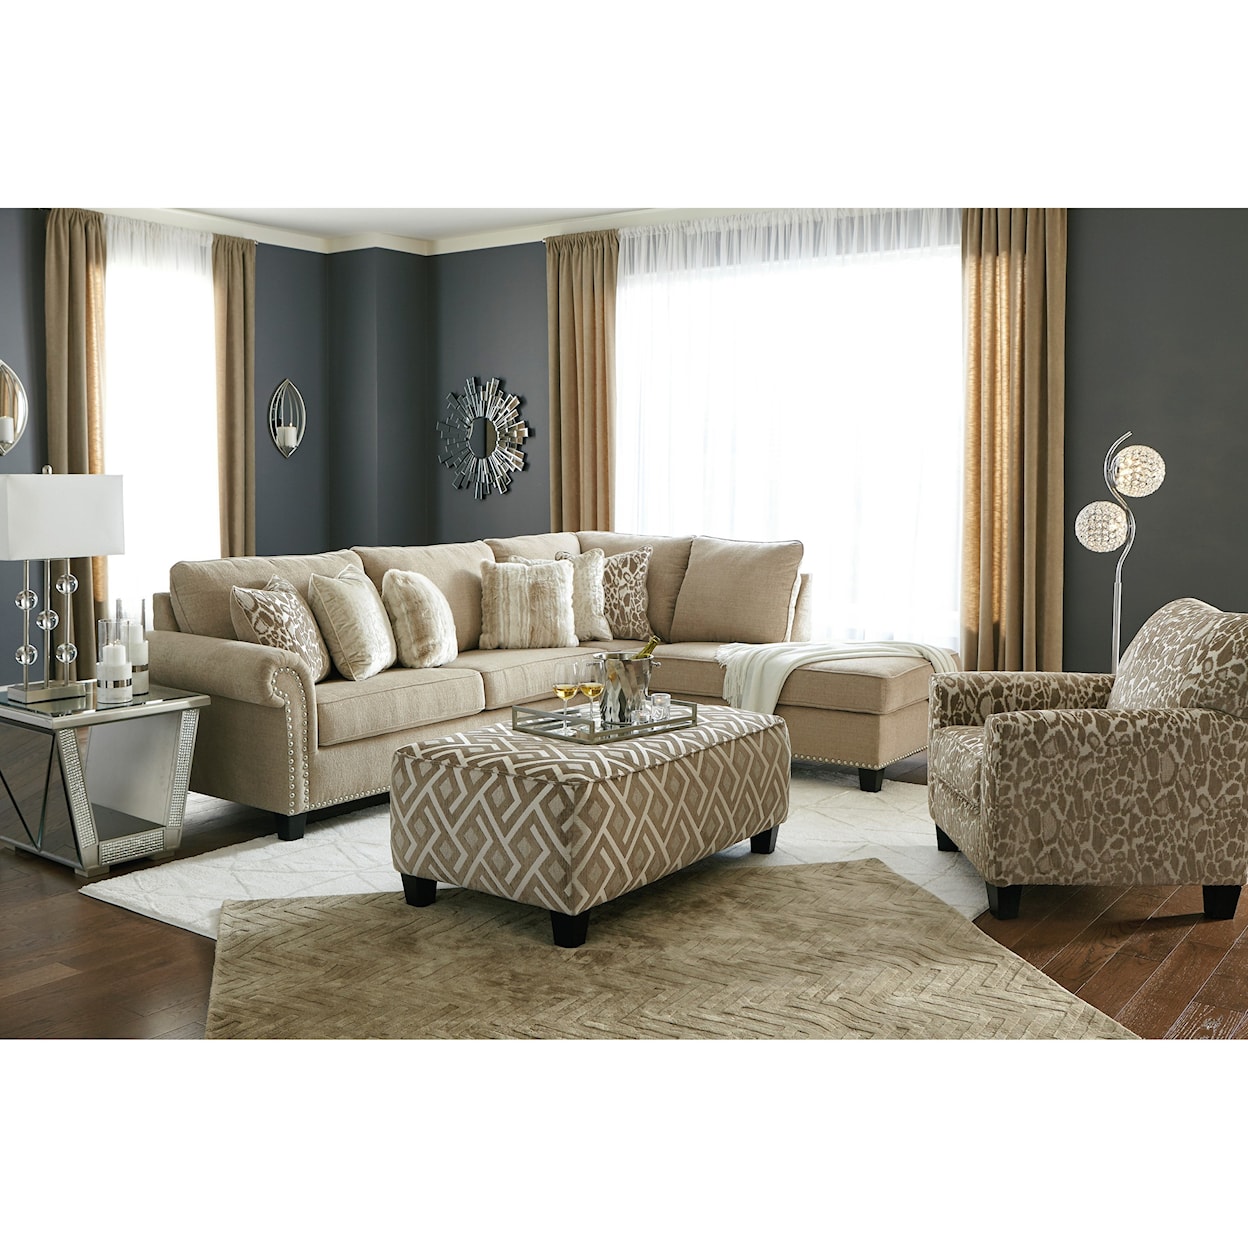 Signature Dovemont Living Room Group